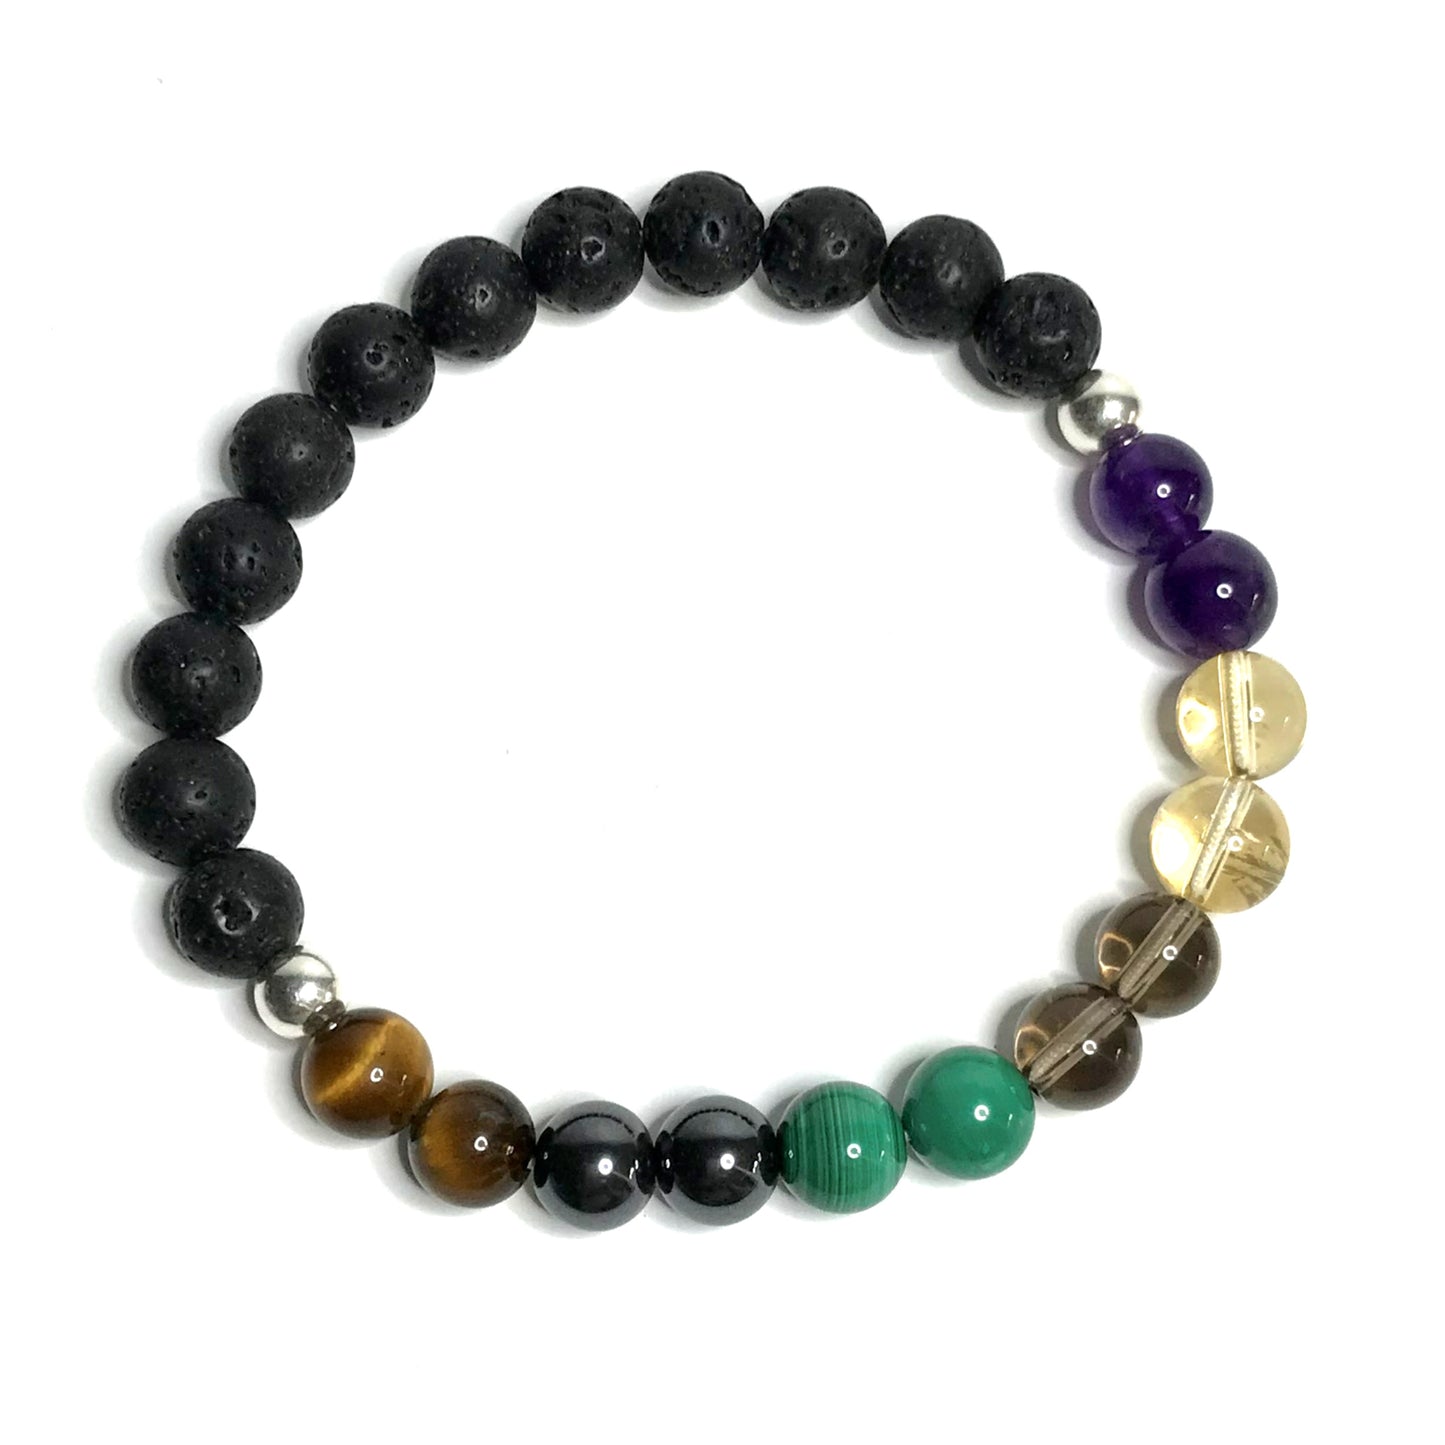 Addiction recovery bracelet showing 6 difference crystals